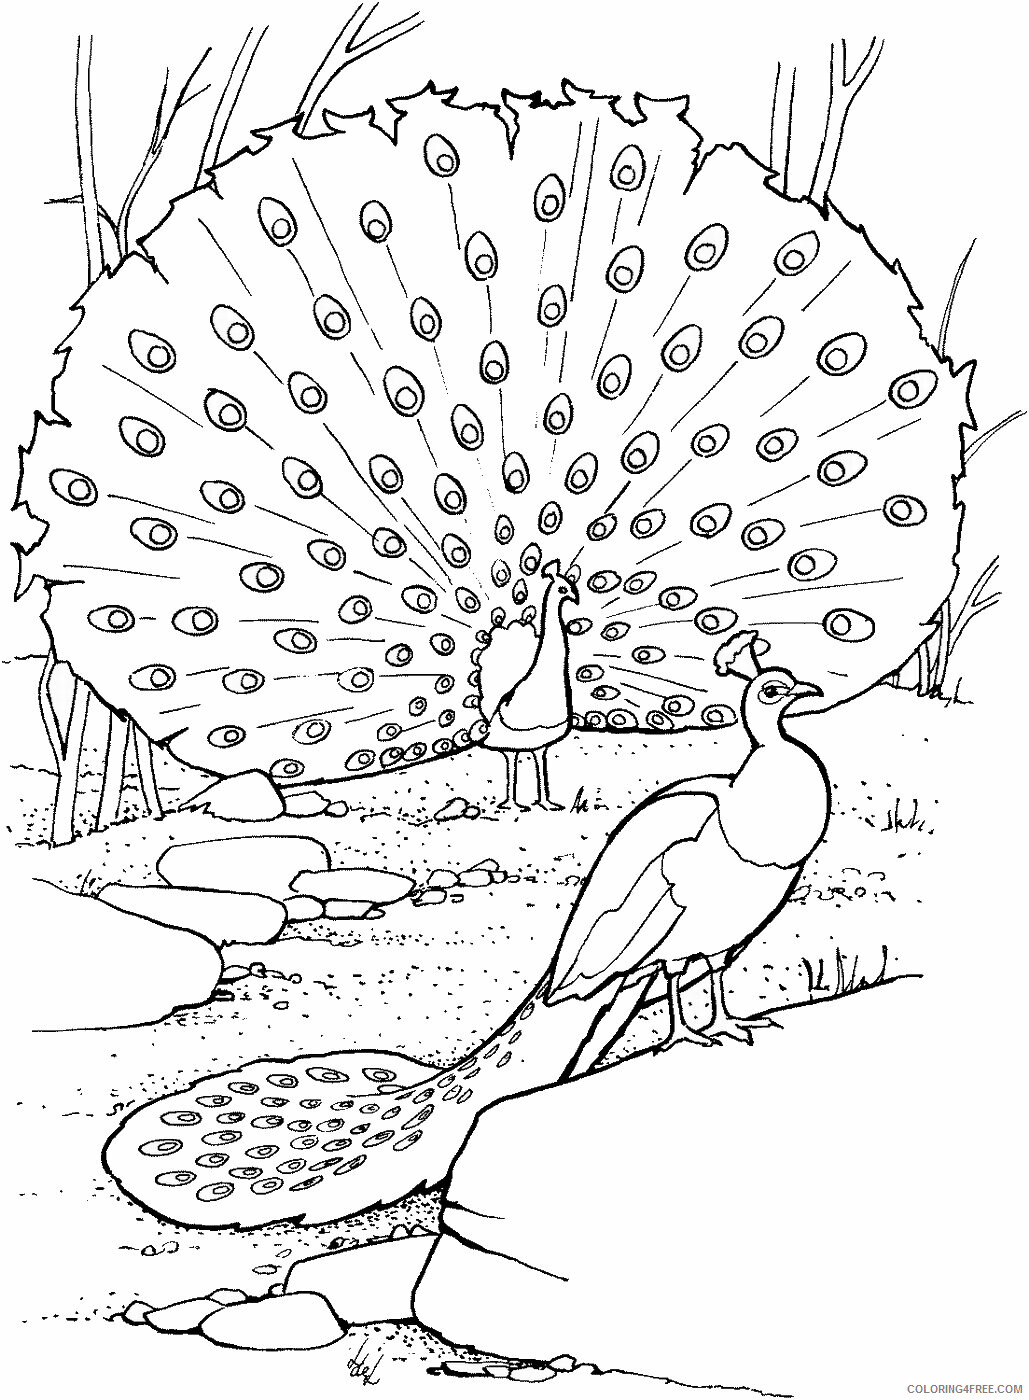 Peacock Coloring Pages Animal Printable Sheets peacock_cl_9 2021 3768 Coloring4free